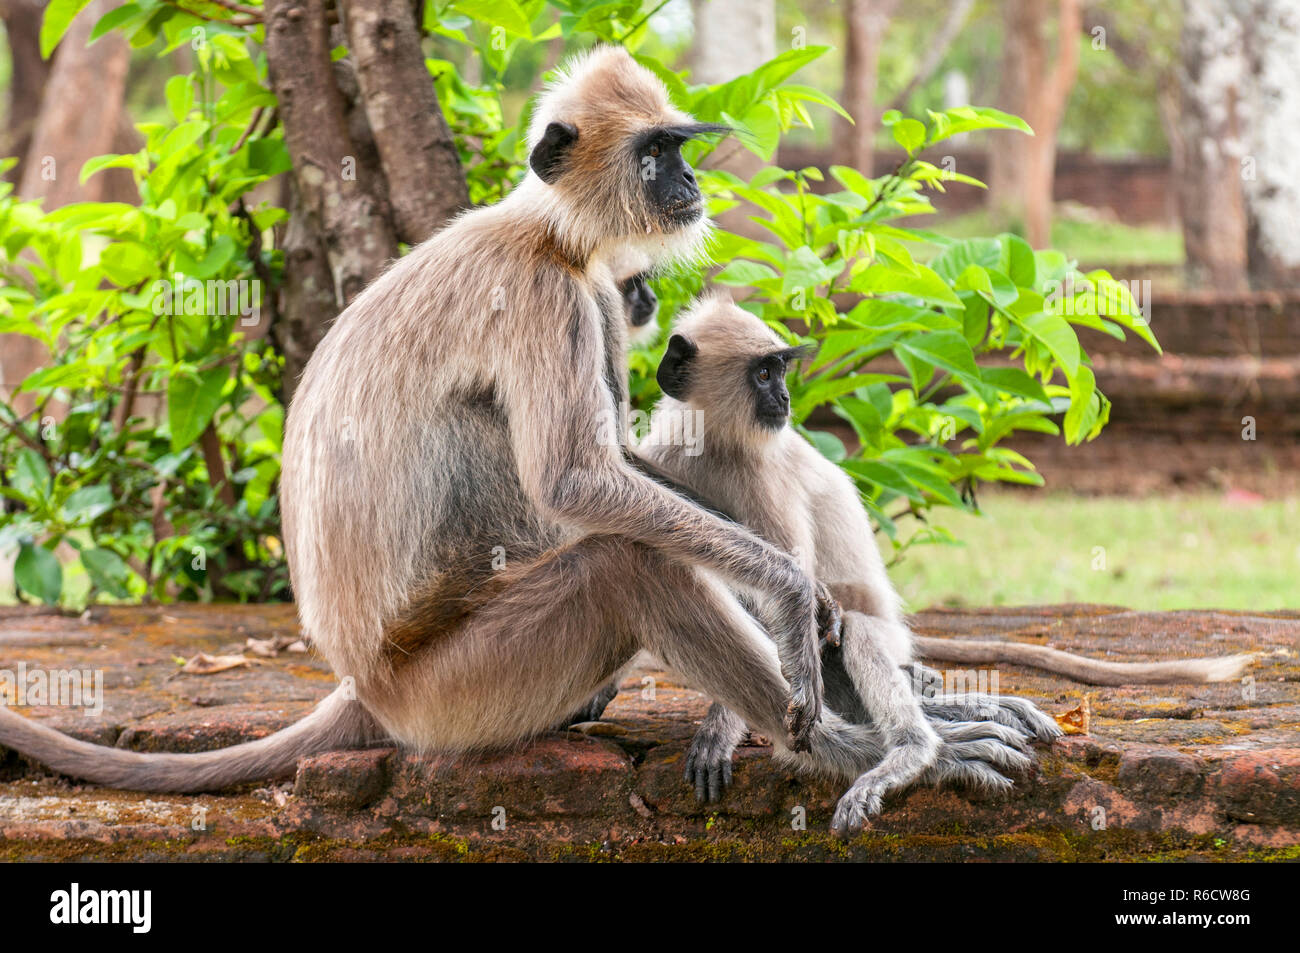 Gray Langurs Or Hanuman Langurs, The Most Widespread Langurs Of The Indian Subcontinent, Are A Group Of Old World Monkeys, Polonnaruwa, Sri Lanka Stock Photo